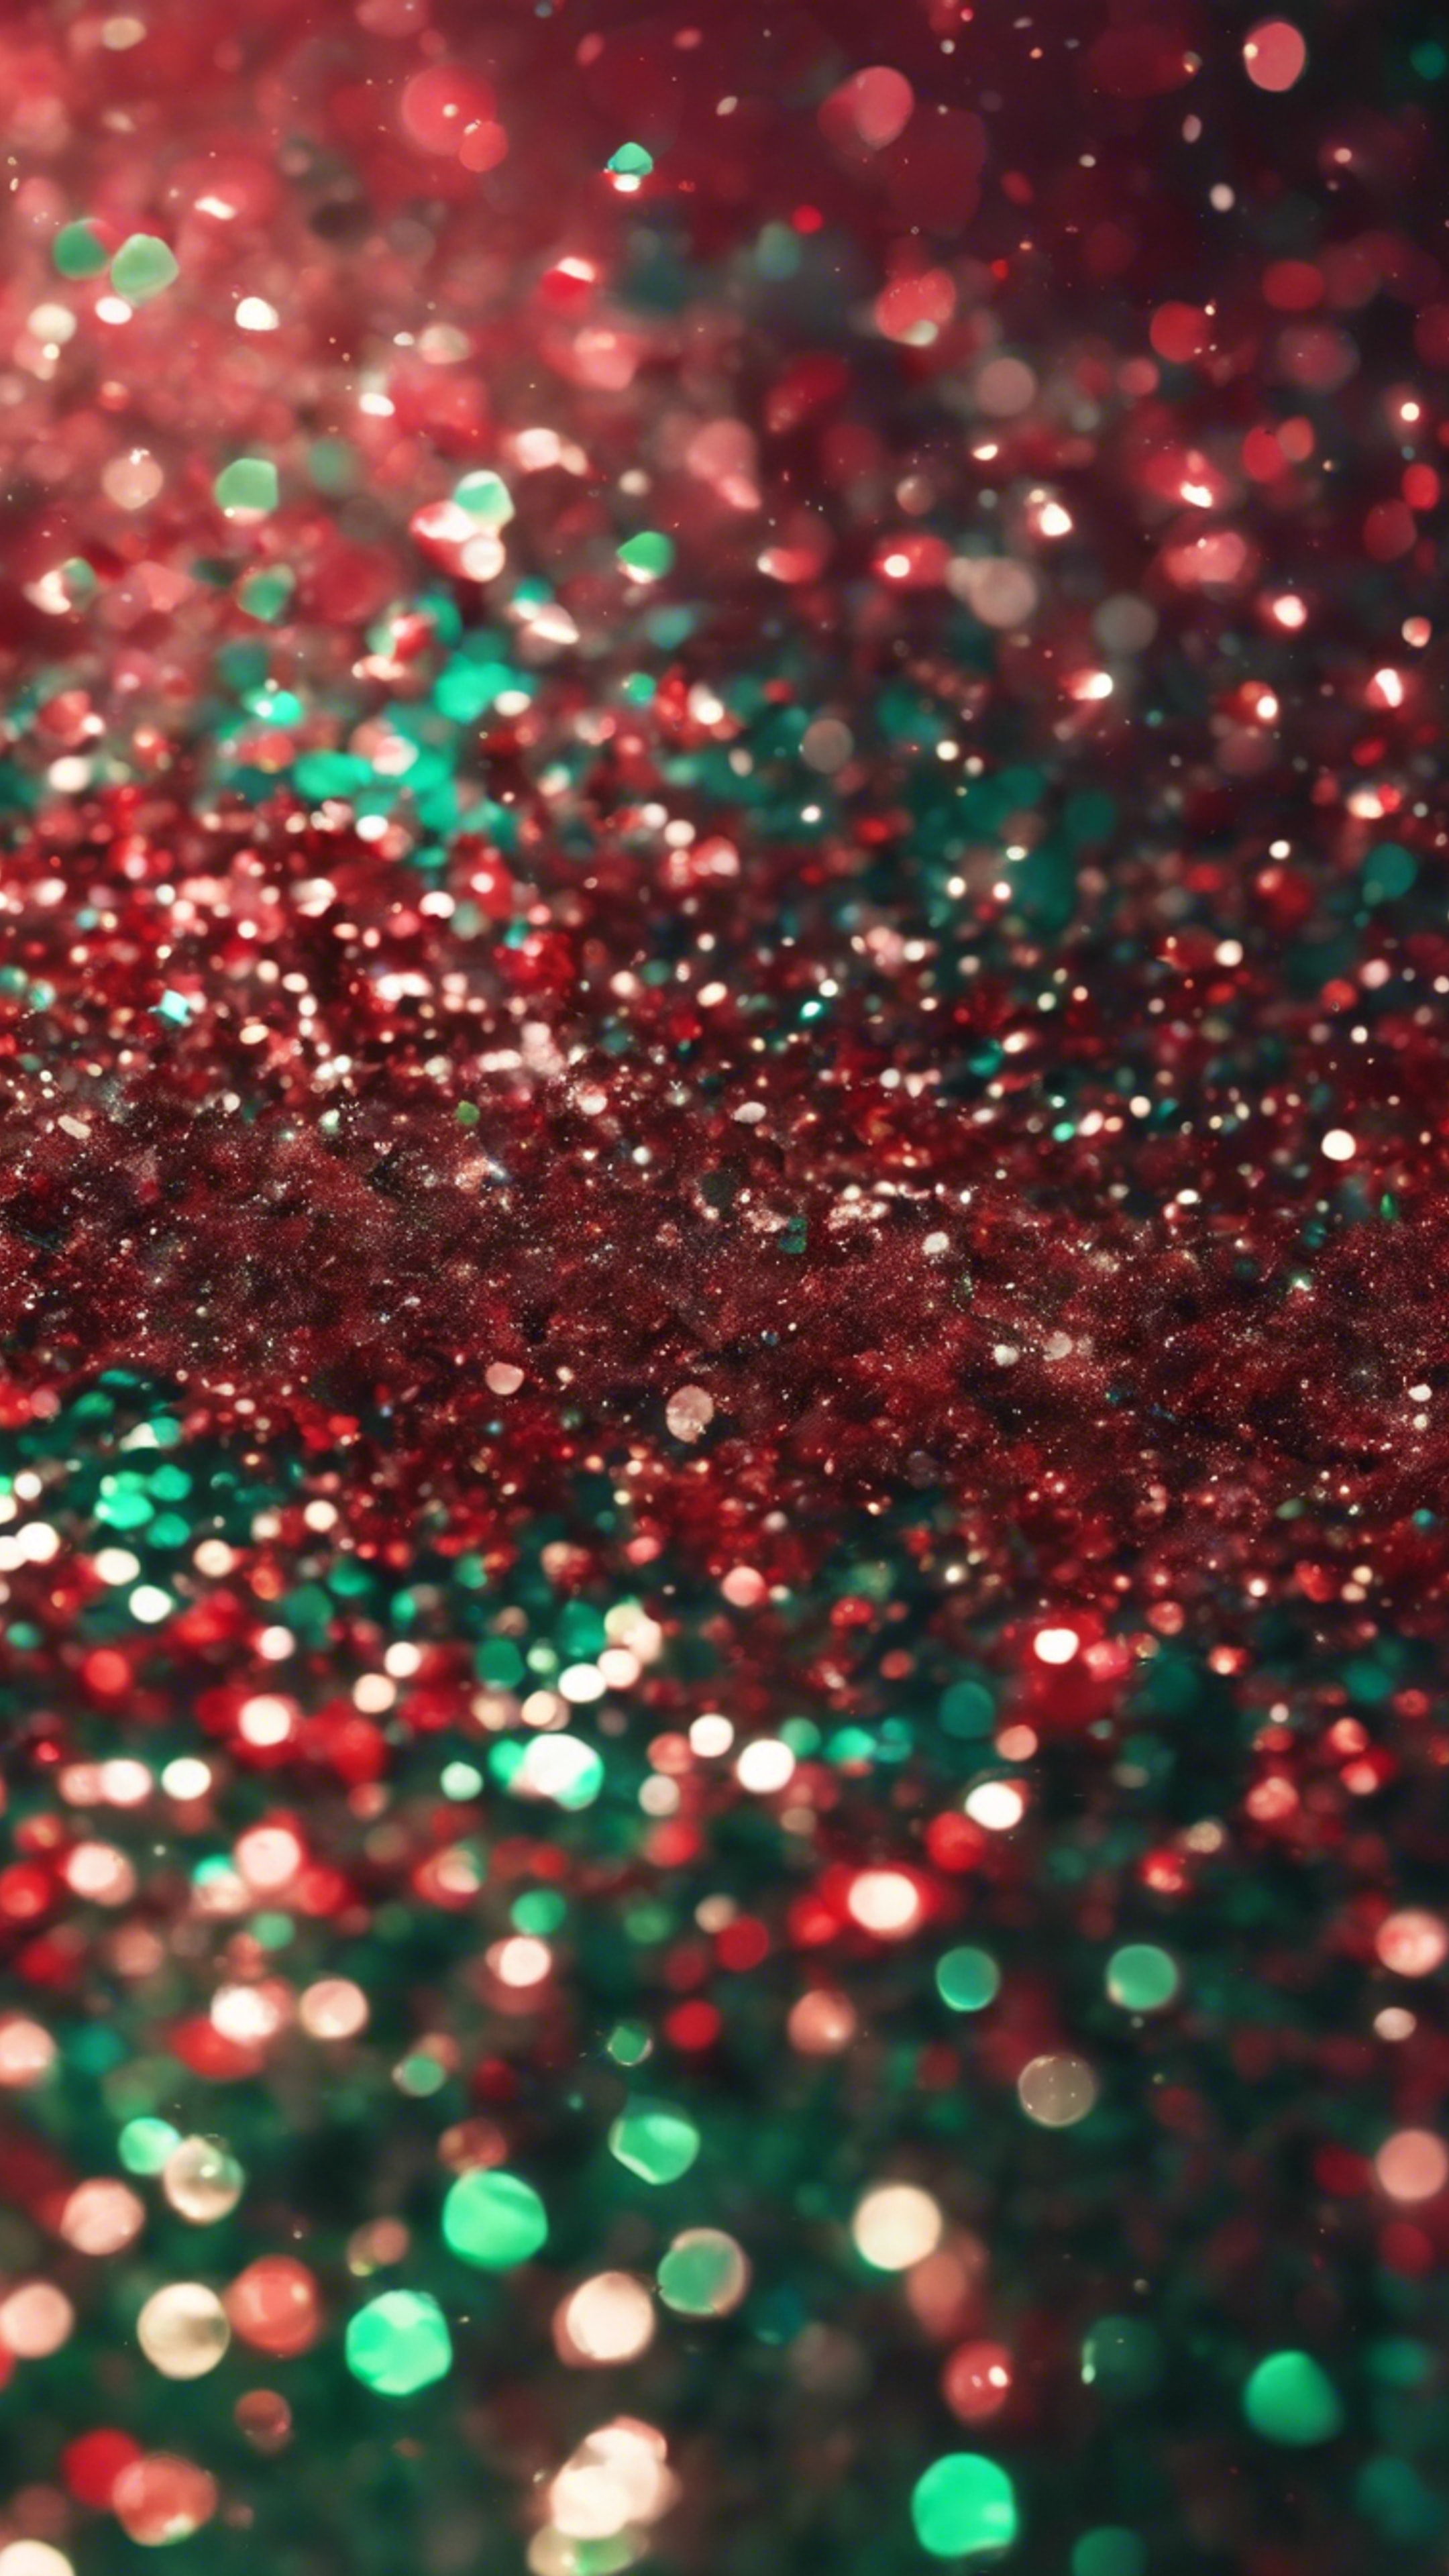 A mix of large and small particles of red and green glitter Ფონი[305fad2da0d041f9bf26]